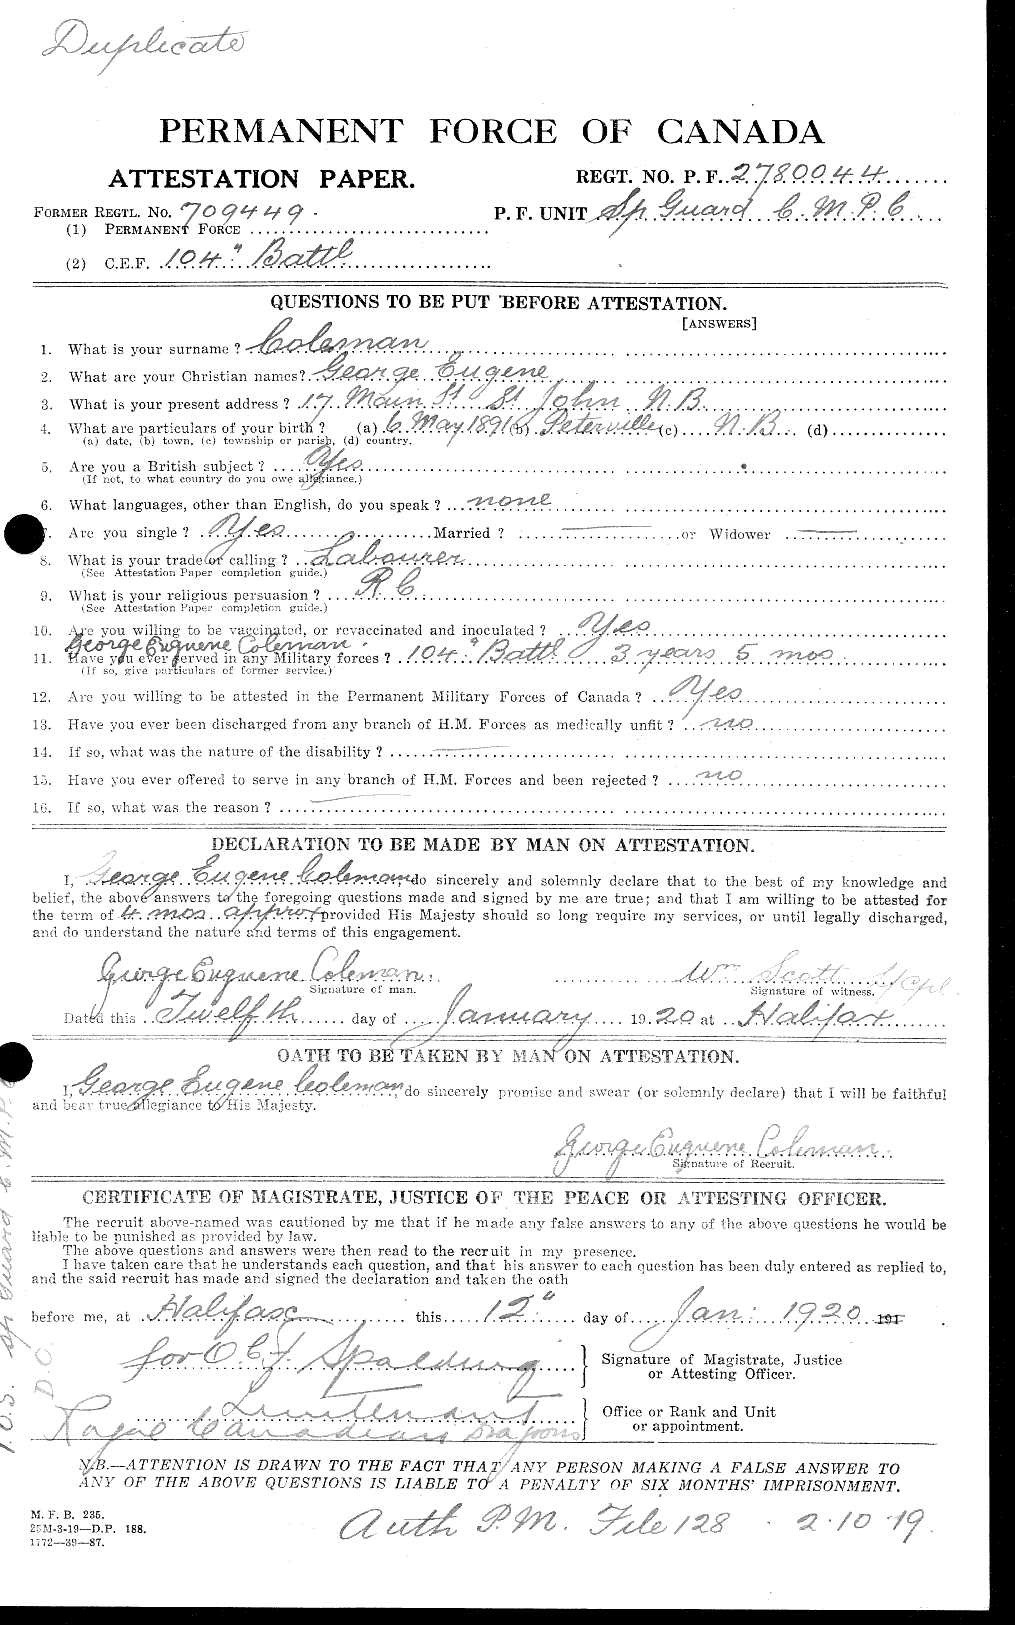 Personnel Records of the First World War - CEF 028153c